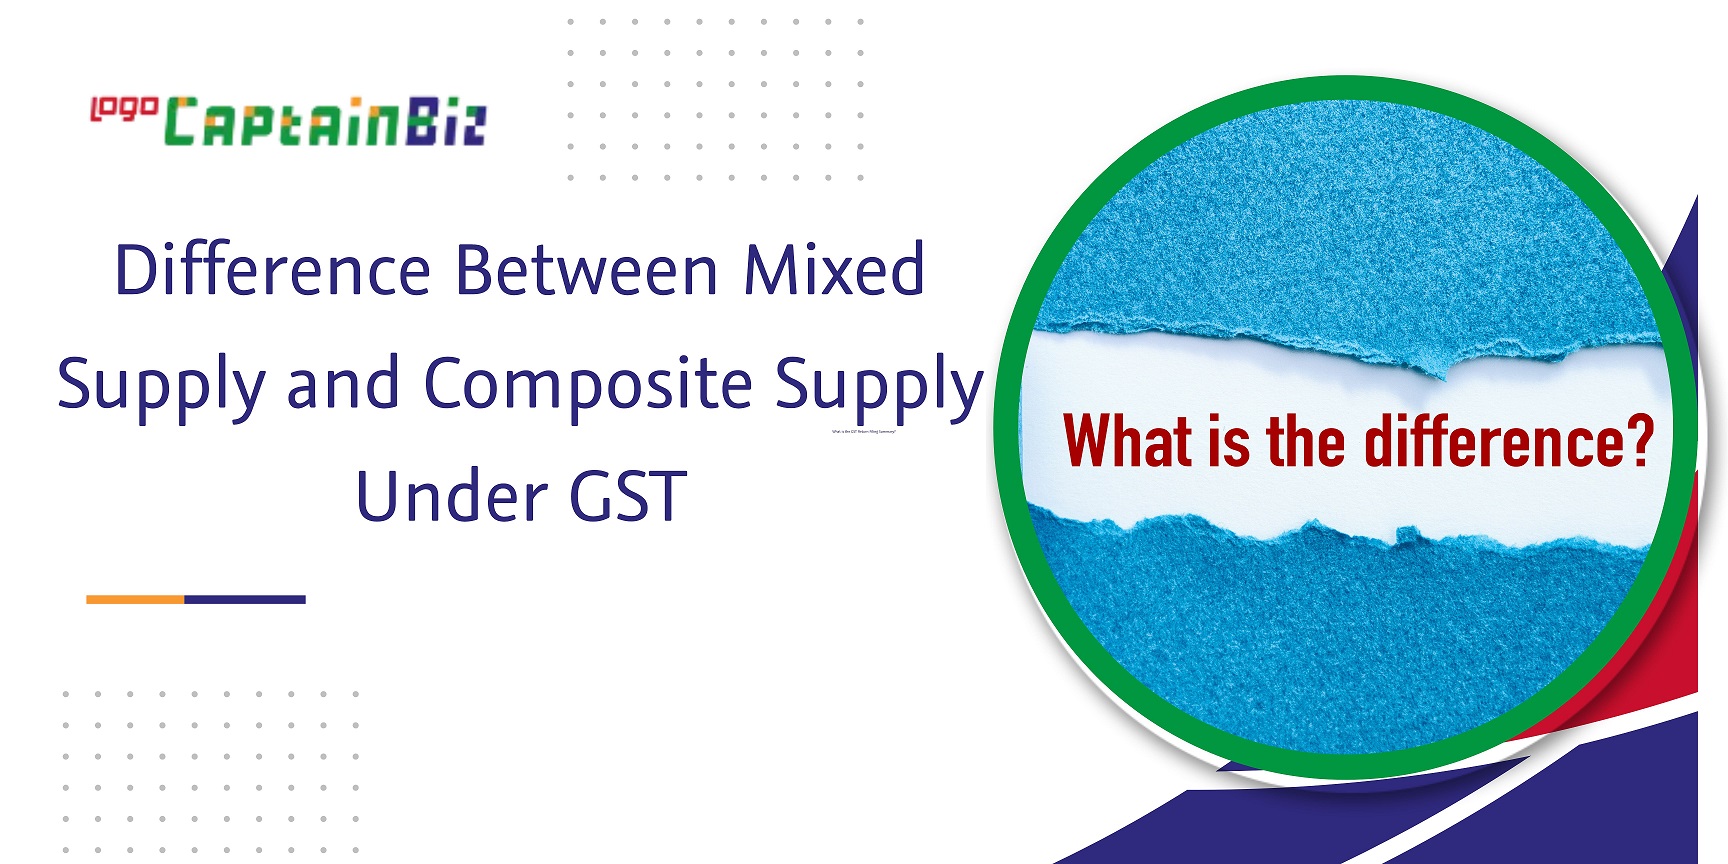 CaptainBiz: difference between mixed supply and composite supply under gst